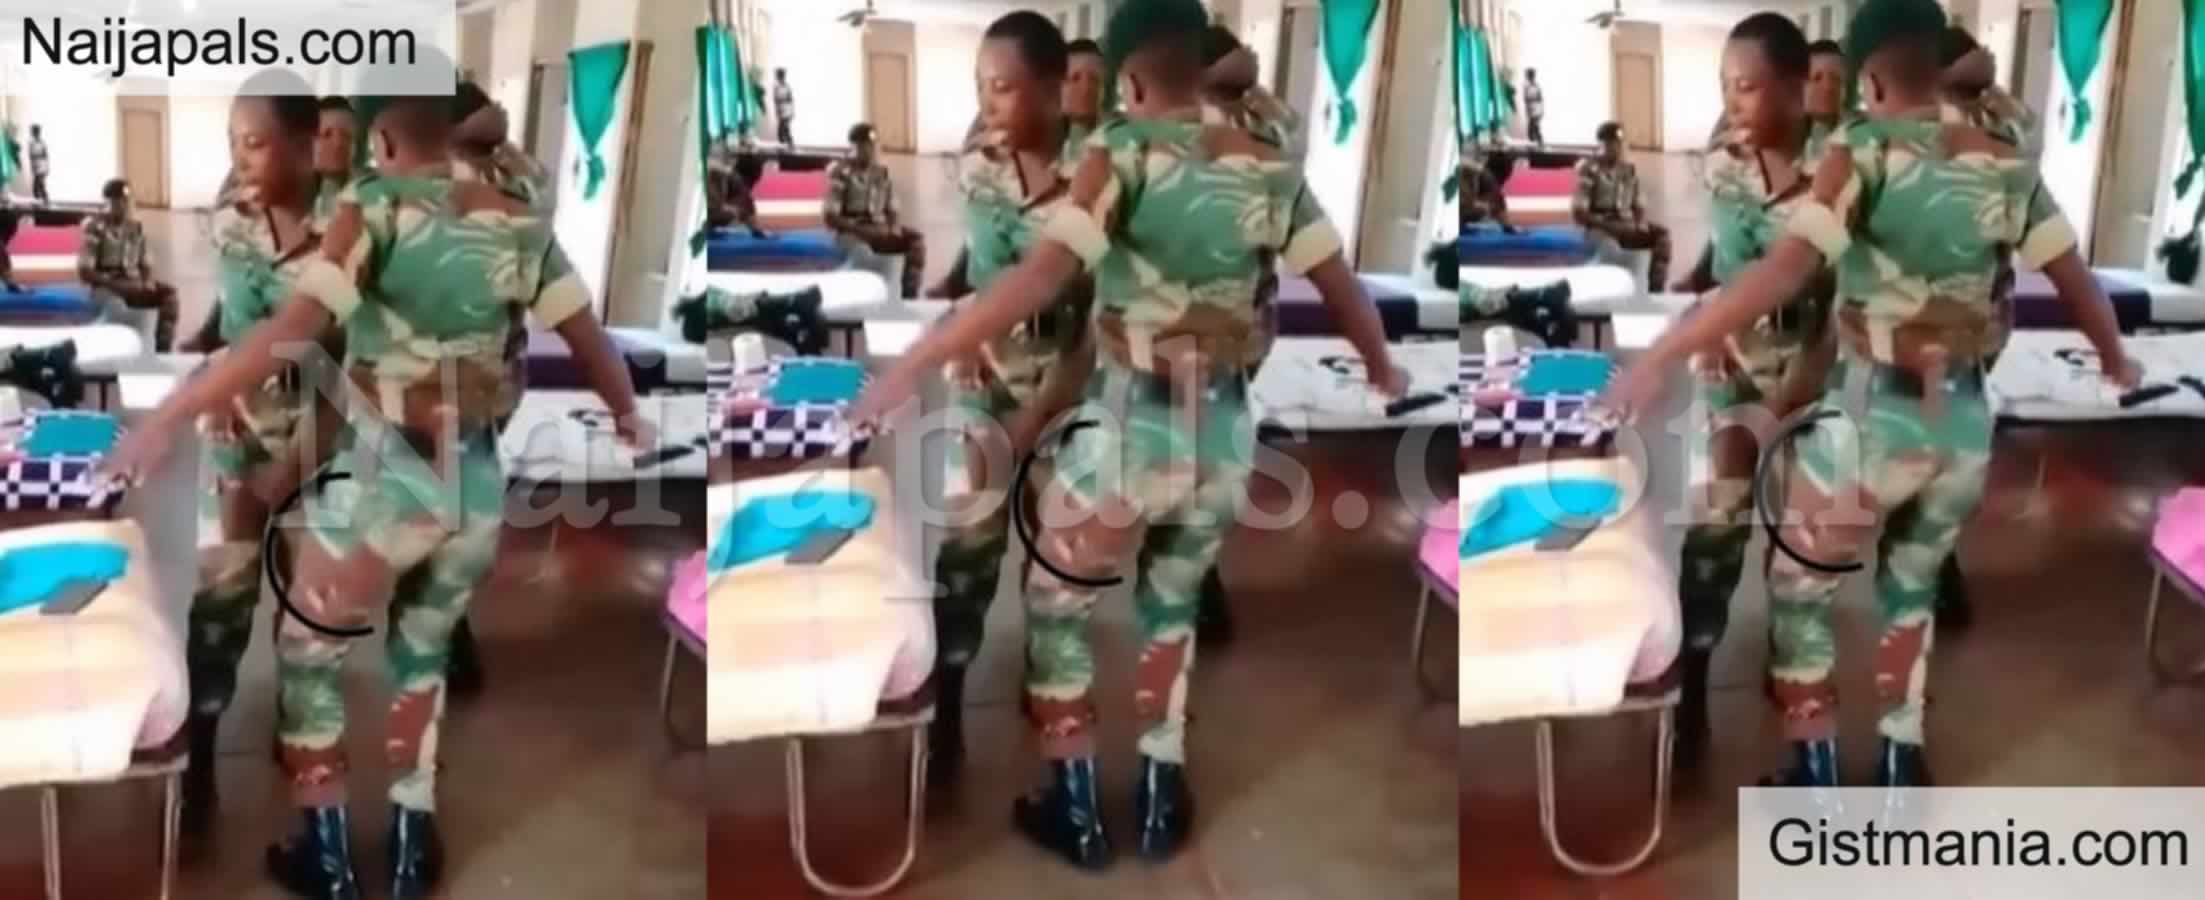 <img alt='.' class='lazyload' data-src='https://img.gistmania.com/emot/video.gif' /> Check Out <b>Video Of Nigerian Female Soldiers Twerking In Their Uniform</b>